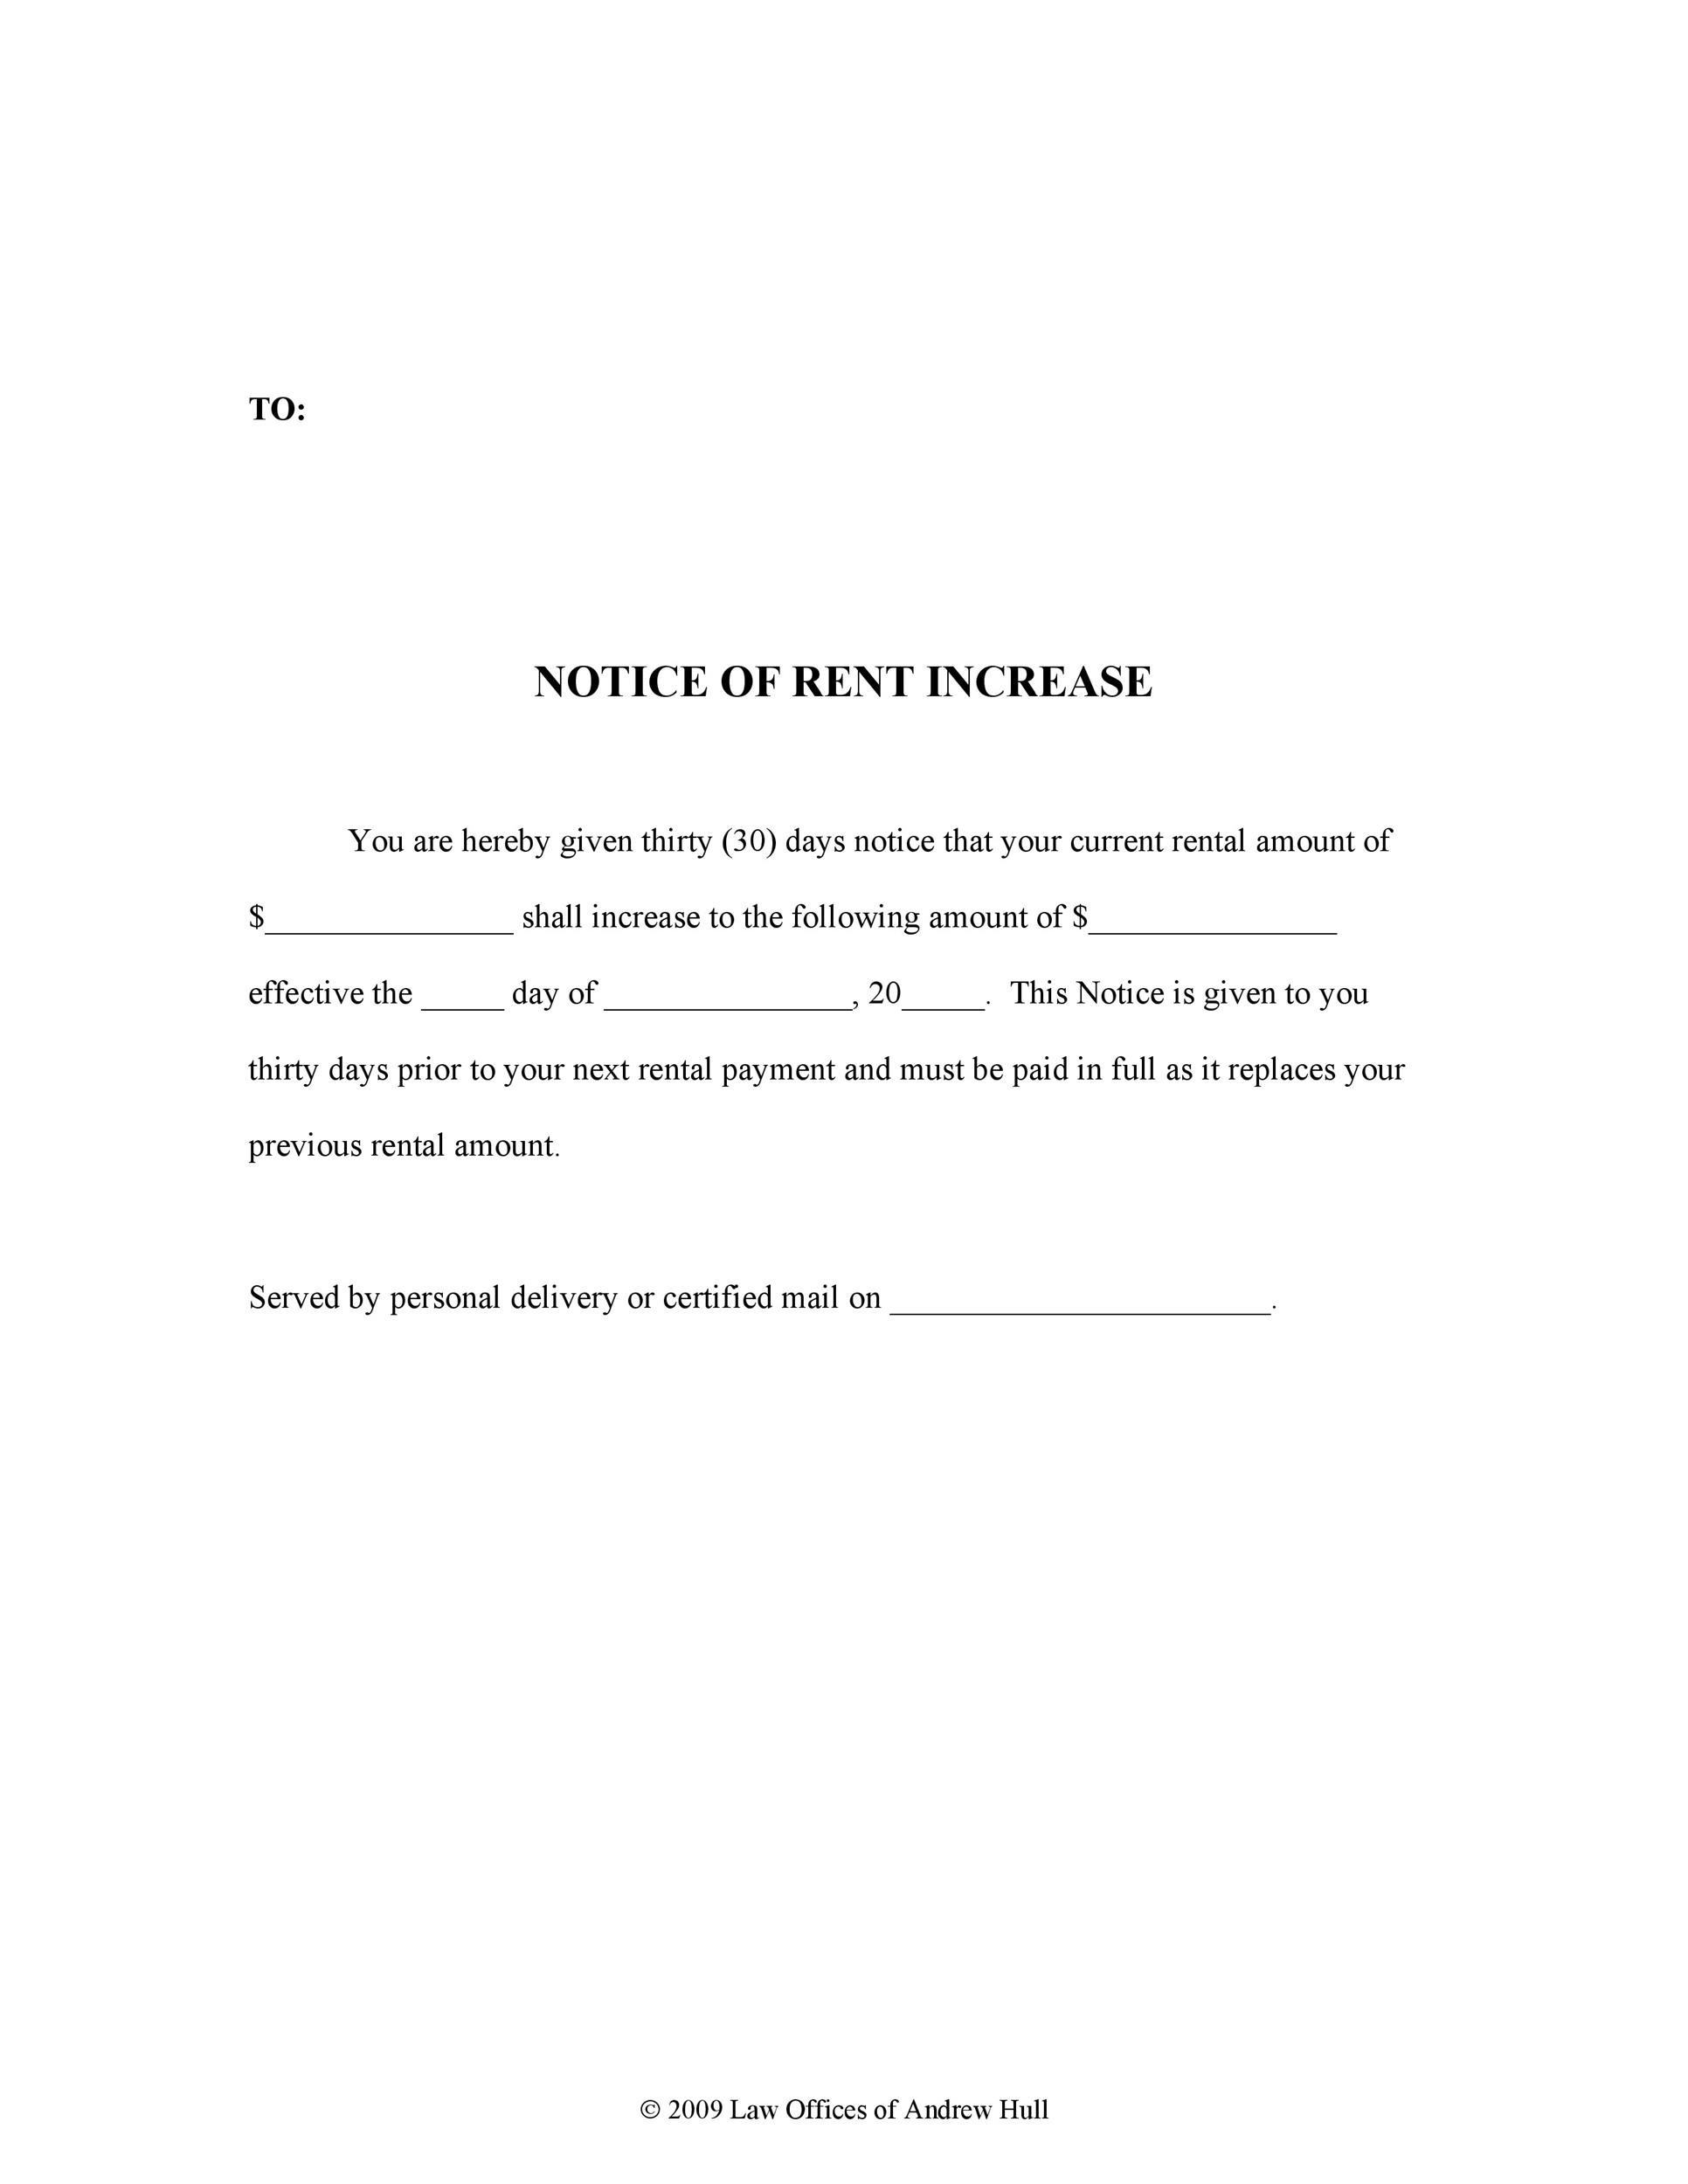 46 Friendly Rent Increase Letters (Free Samples) ᐅ TemplateLab